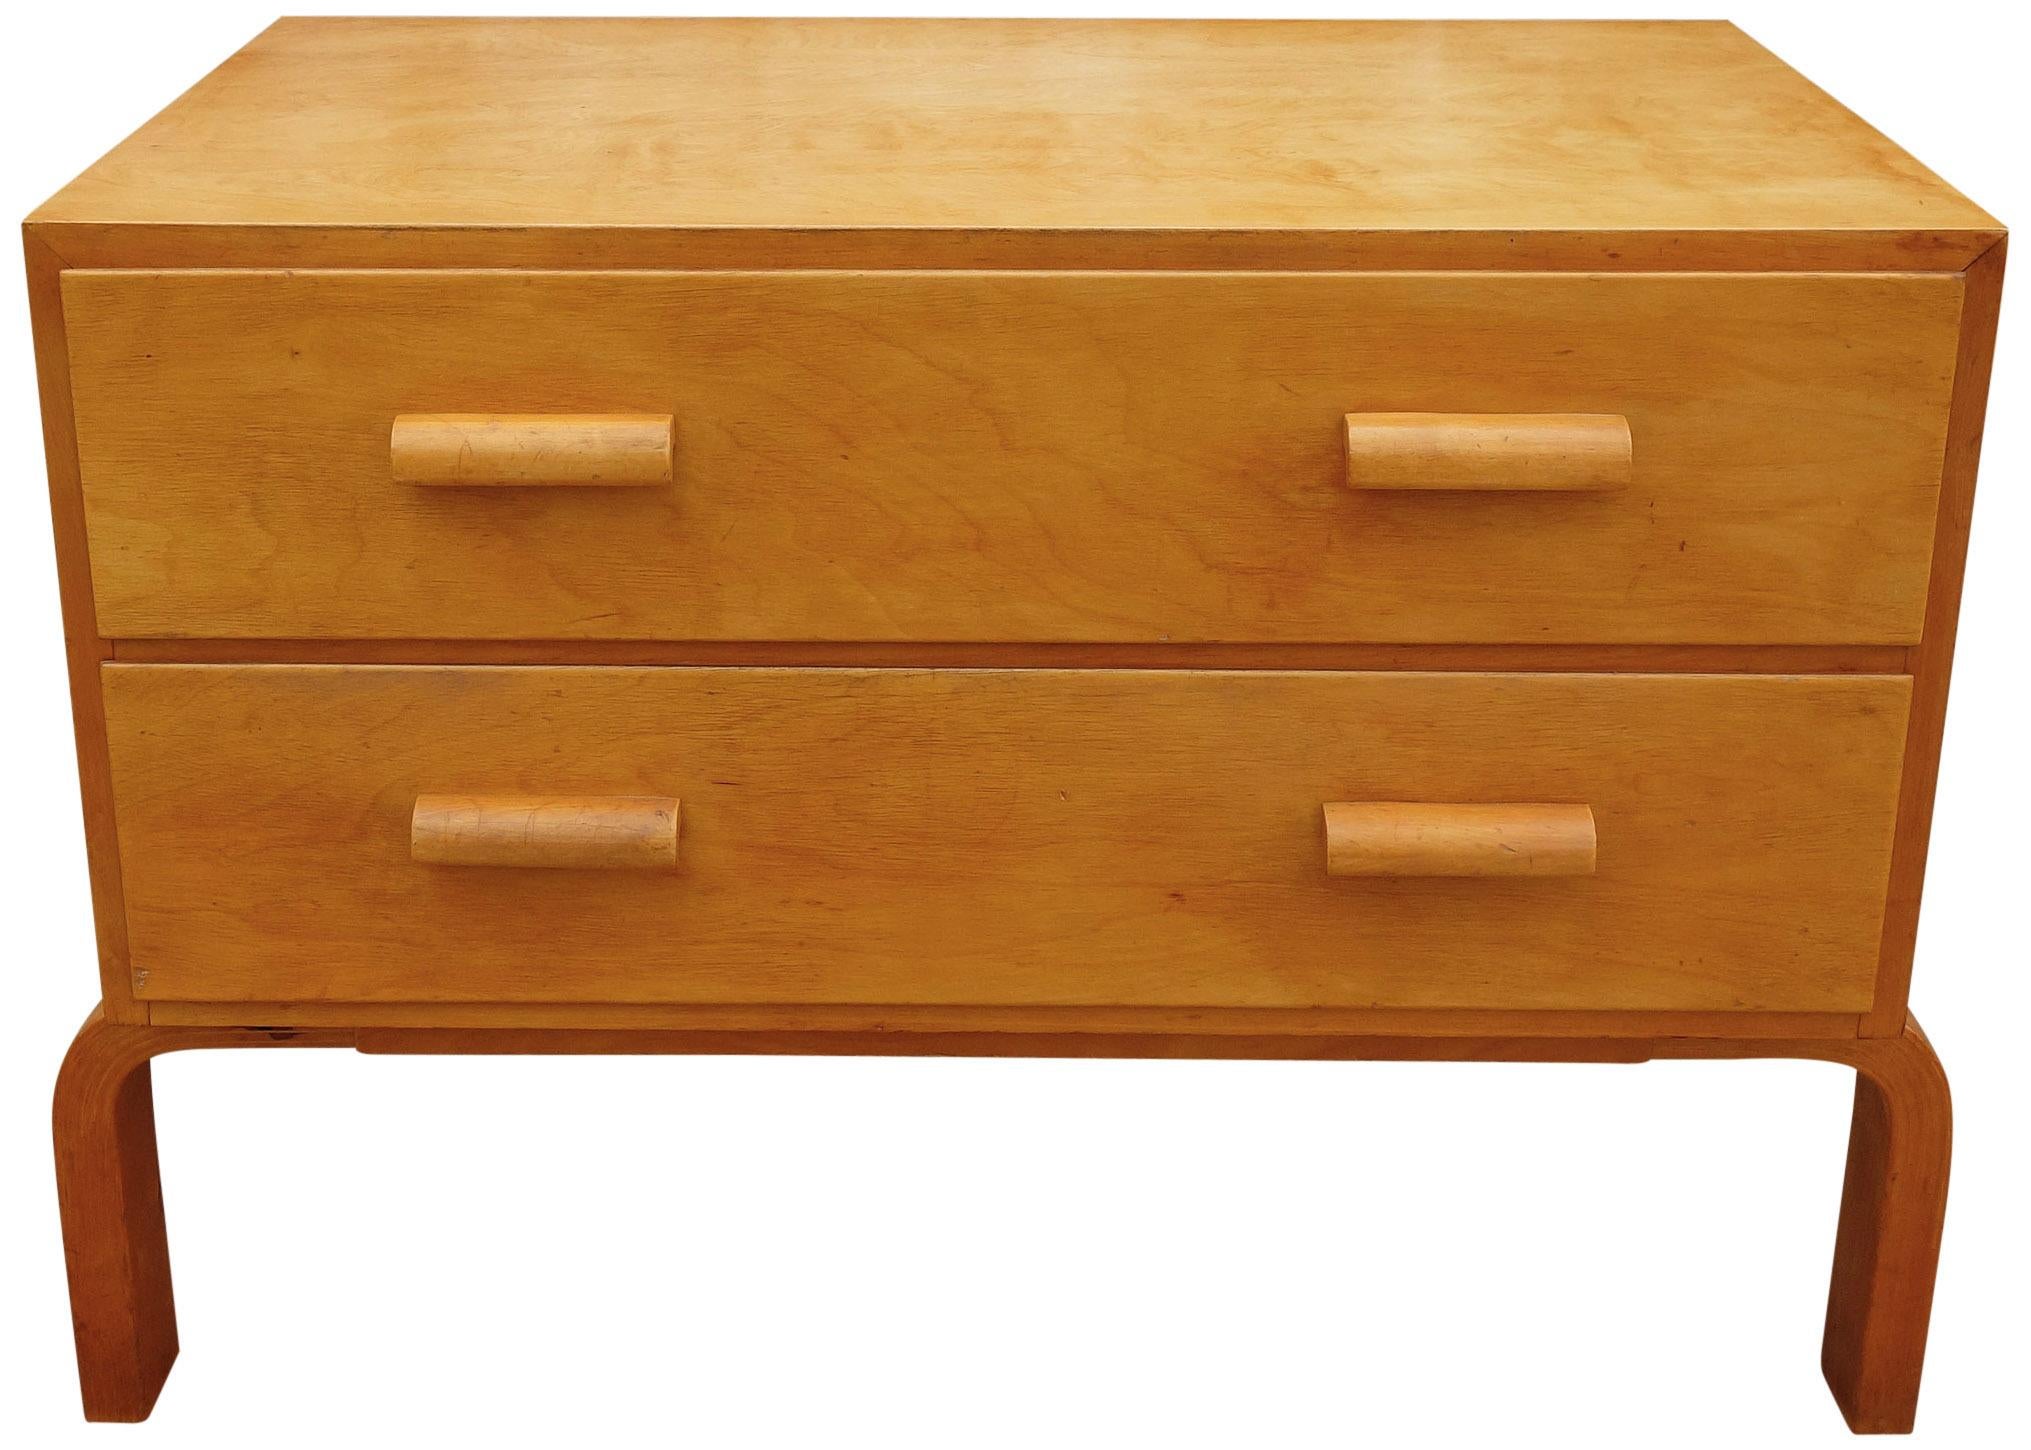 Incredibly rare and early two drawer dresser or sideboard by Finnish architect and designer Alvar Allto. Can equally be used as a night stand or end table given its size. In all original condition displaying wonderful patina and appropriate wear